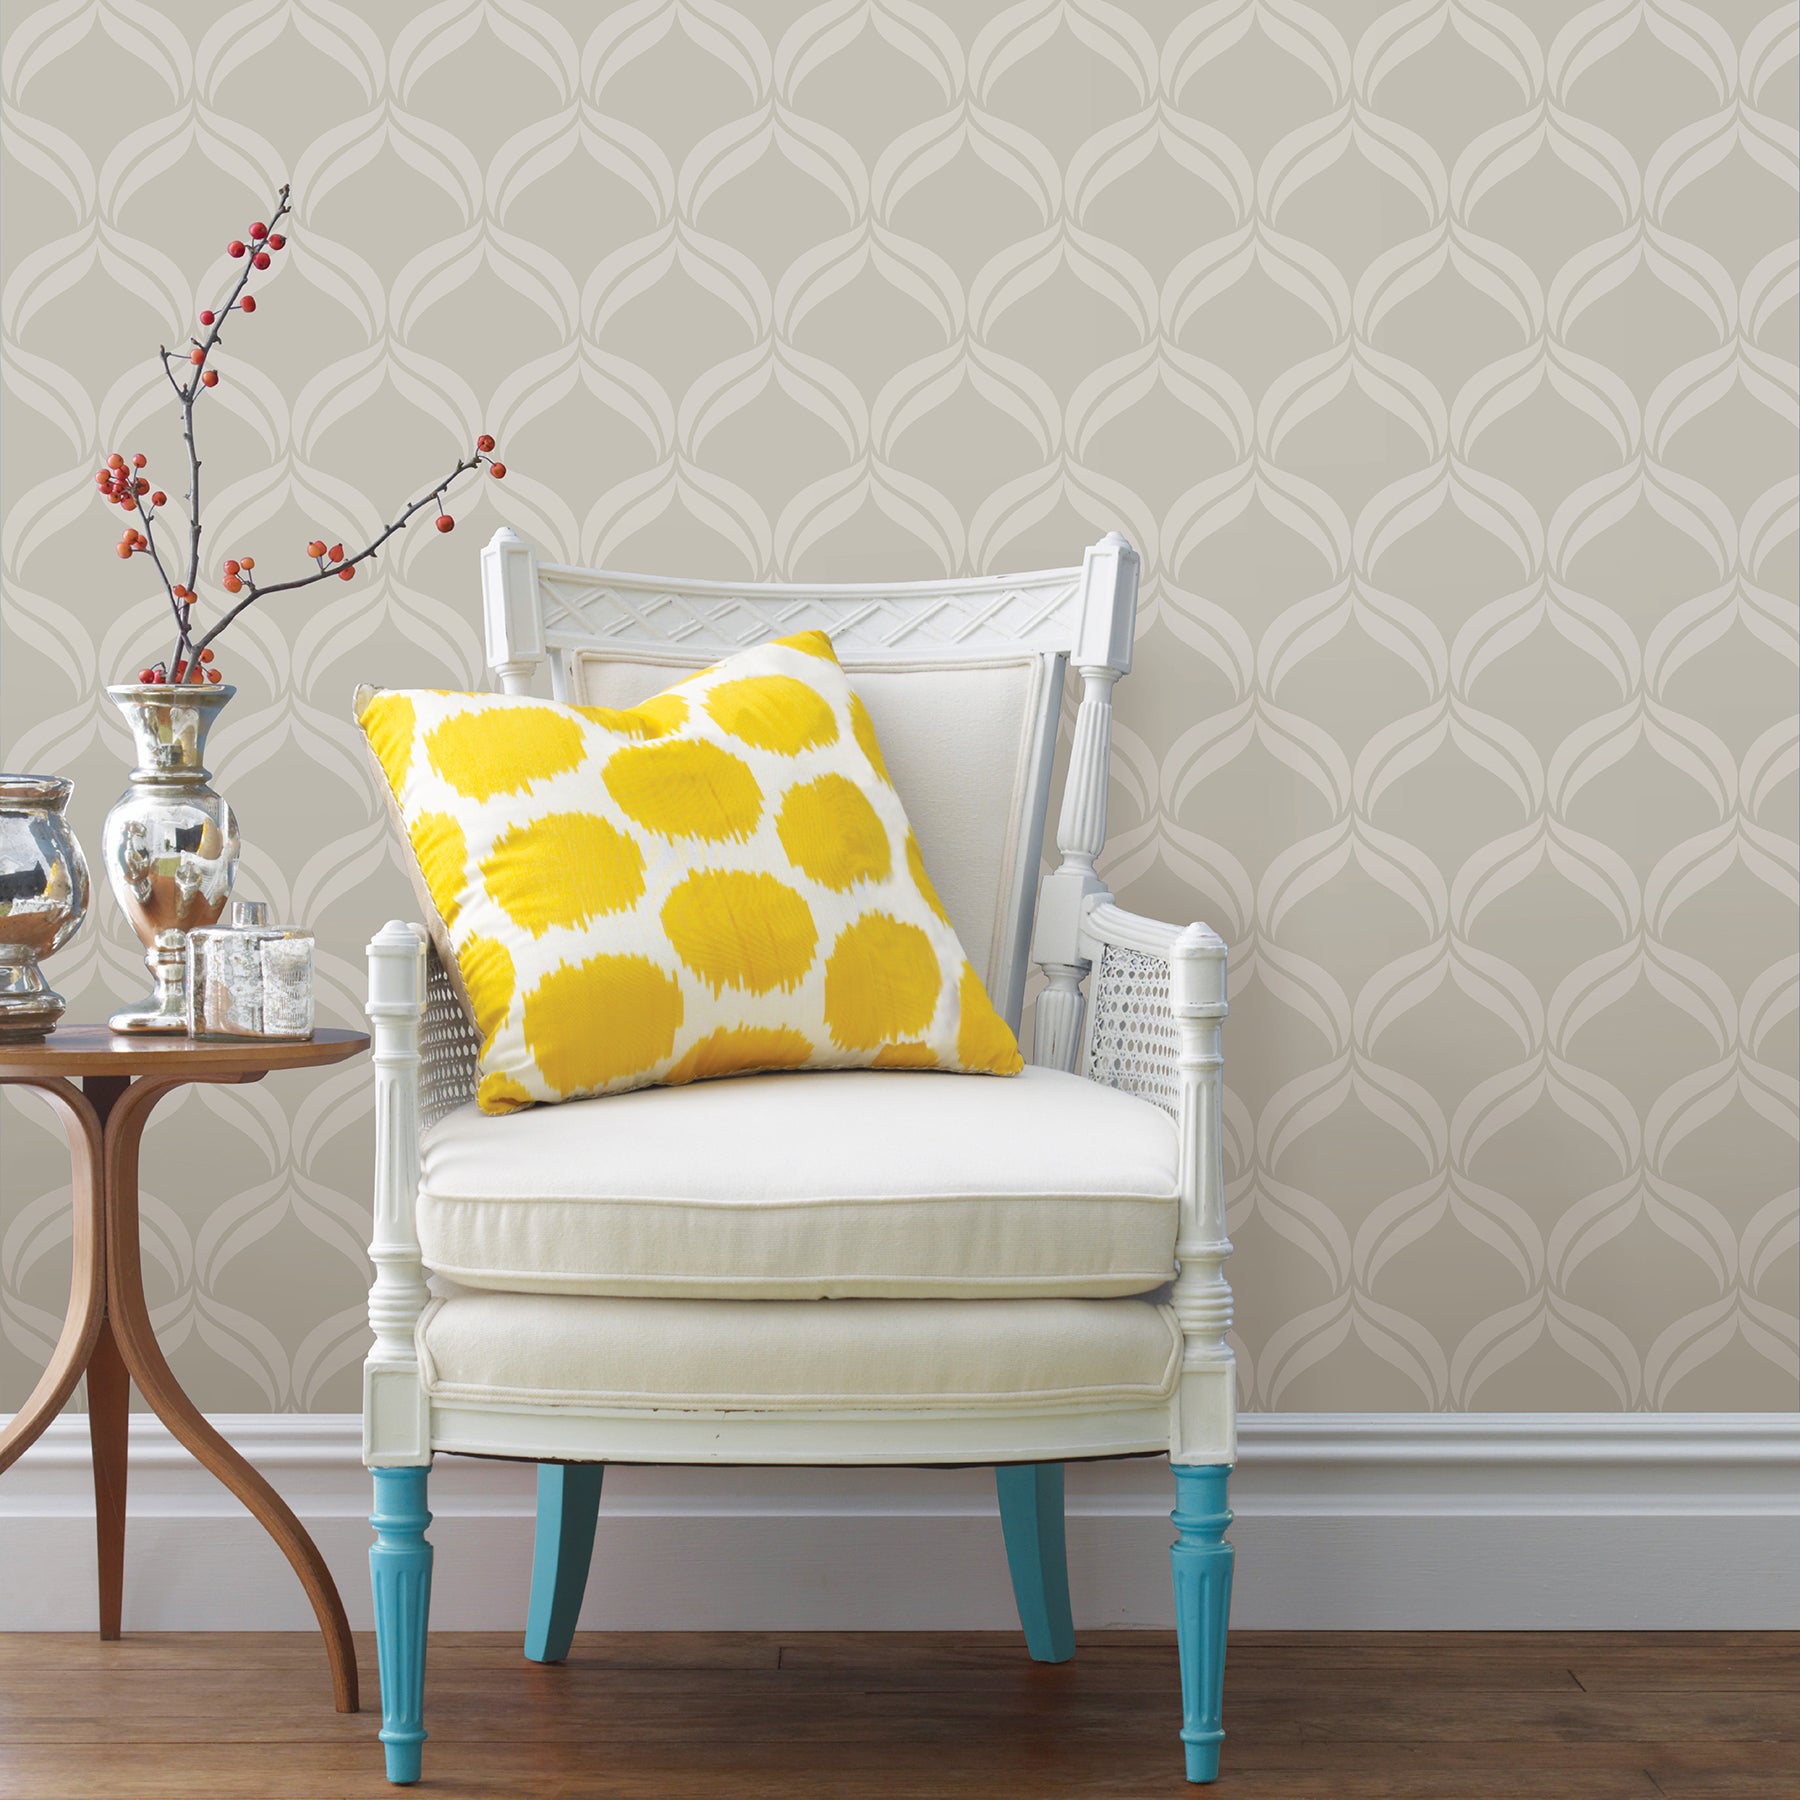 Select 2697-87302 Petals Taupe Ogee A-Street Prints Wallpaper